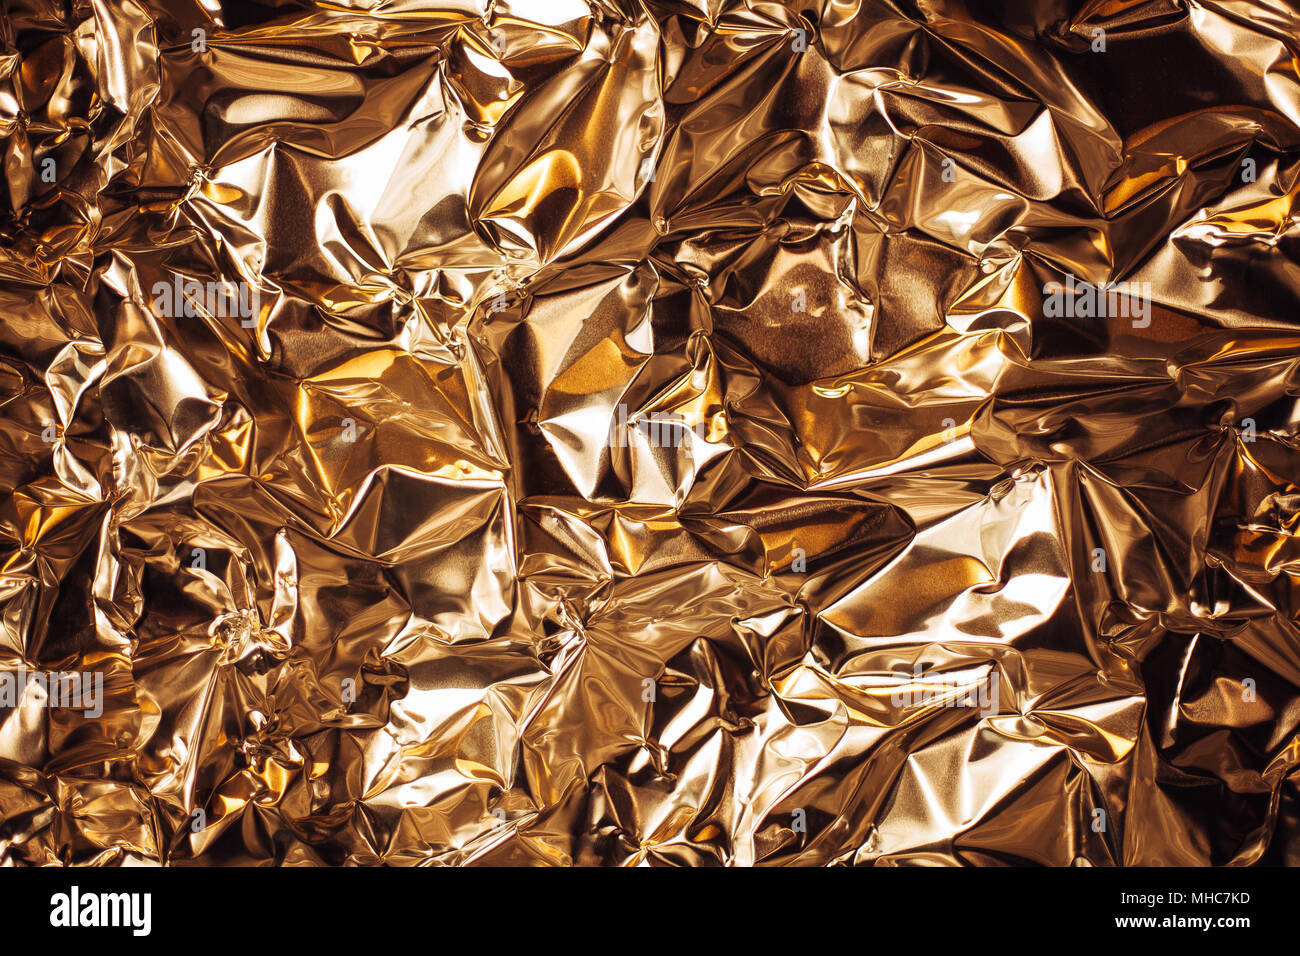 https://c8.alamy.com/comp/MHC7KD/full-frame-take-of-a-sheet-of-crumpled-silver-aluminum-foil-background-MHC7KD.jpg